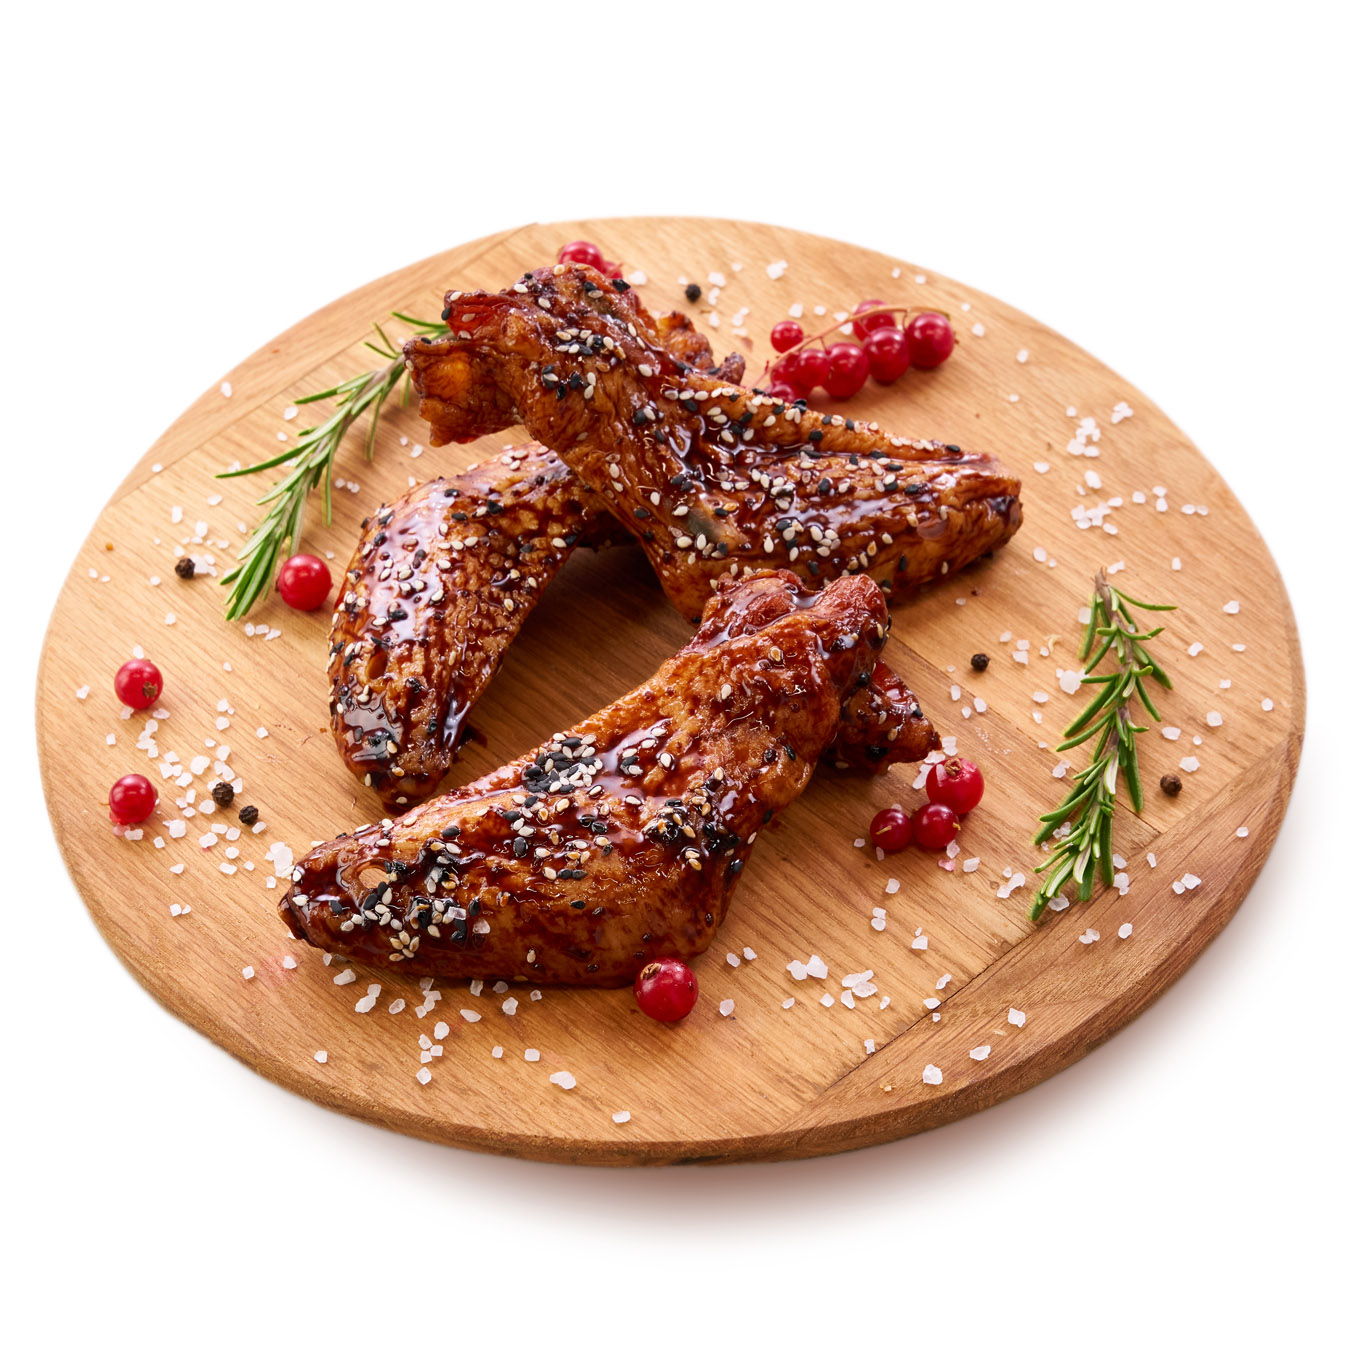 Smoked-baked glazed chicken wings 1pcs (60-70g)